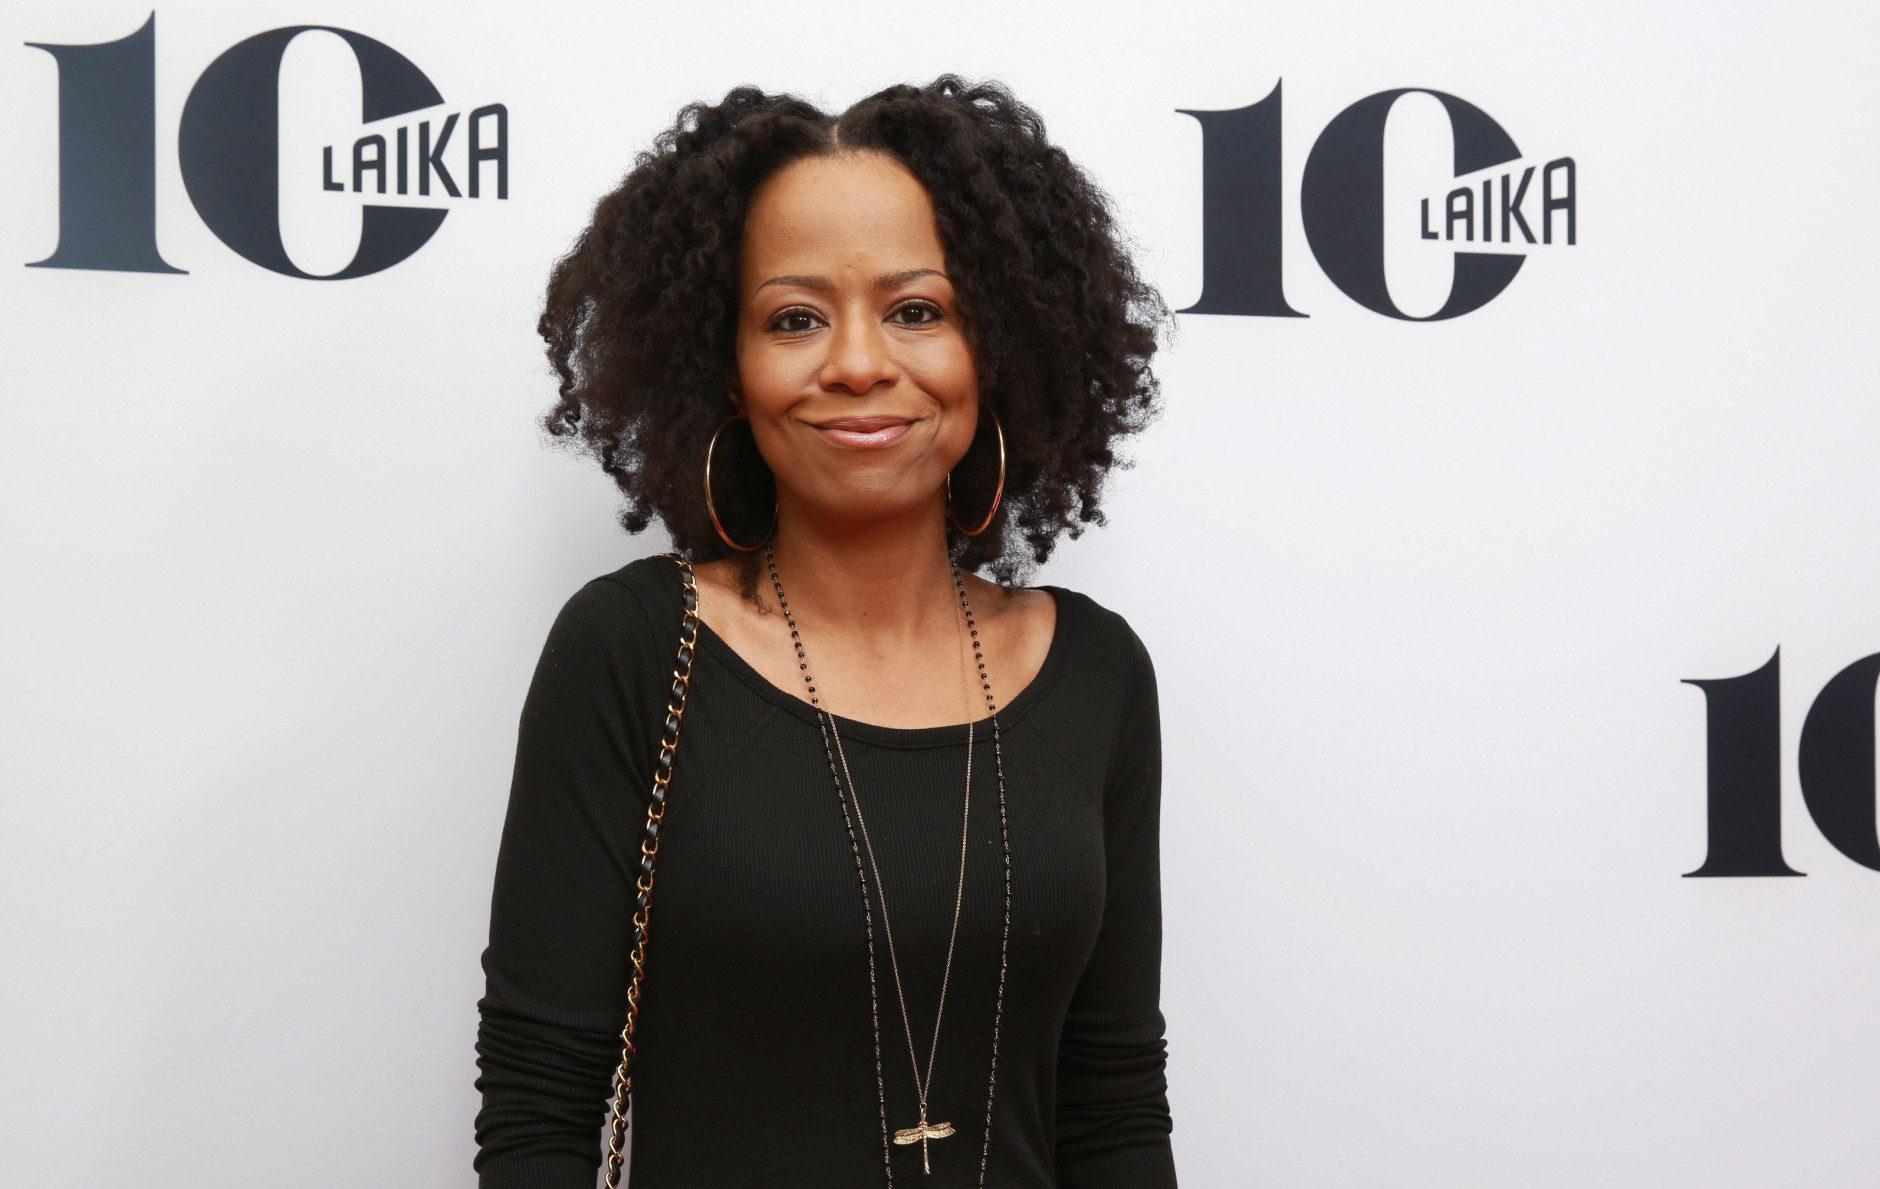 Tempestt Bledsoe seen at the LAIKA 10th Anniversary Party at The London Hotel on Tuesday, Dec. 15, 2015, in West Hollywood, Calif. (Photo by Blair Raughley/Invision for Focus Features/AP Images)